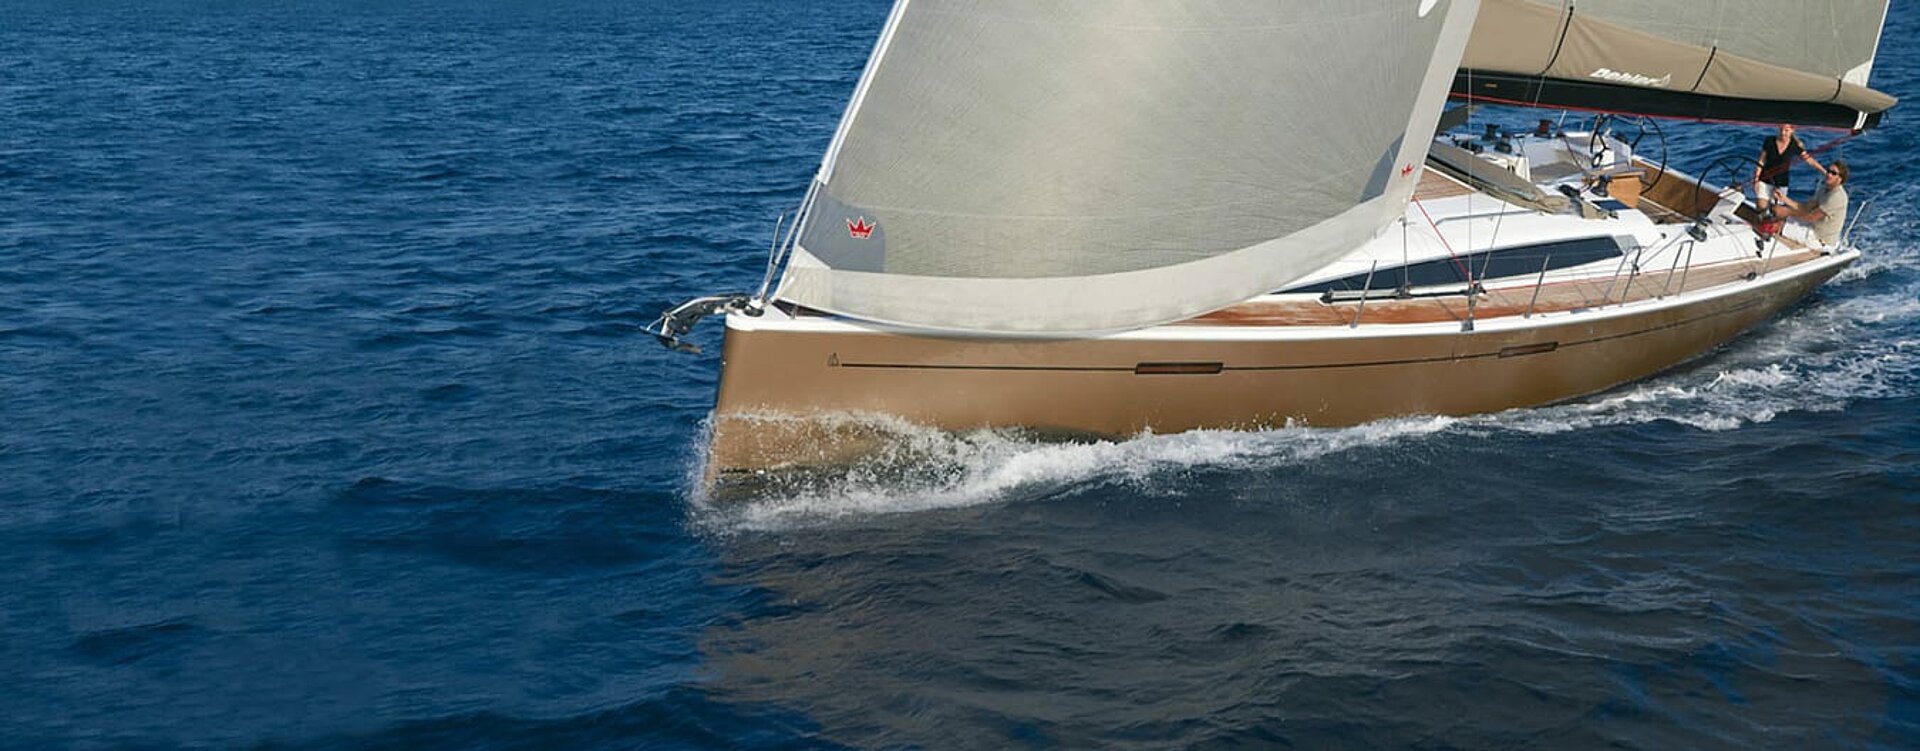 High performance Sailing Yachts at their top speed